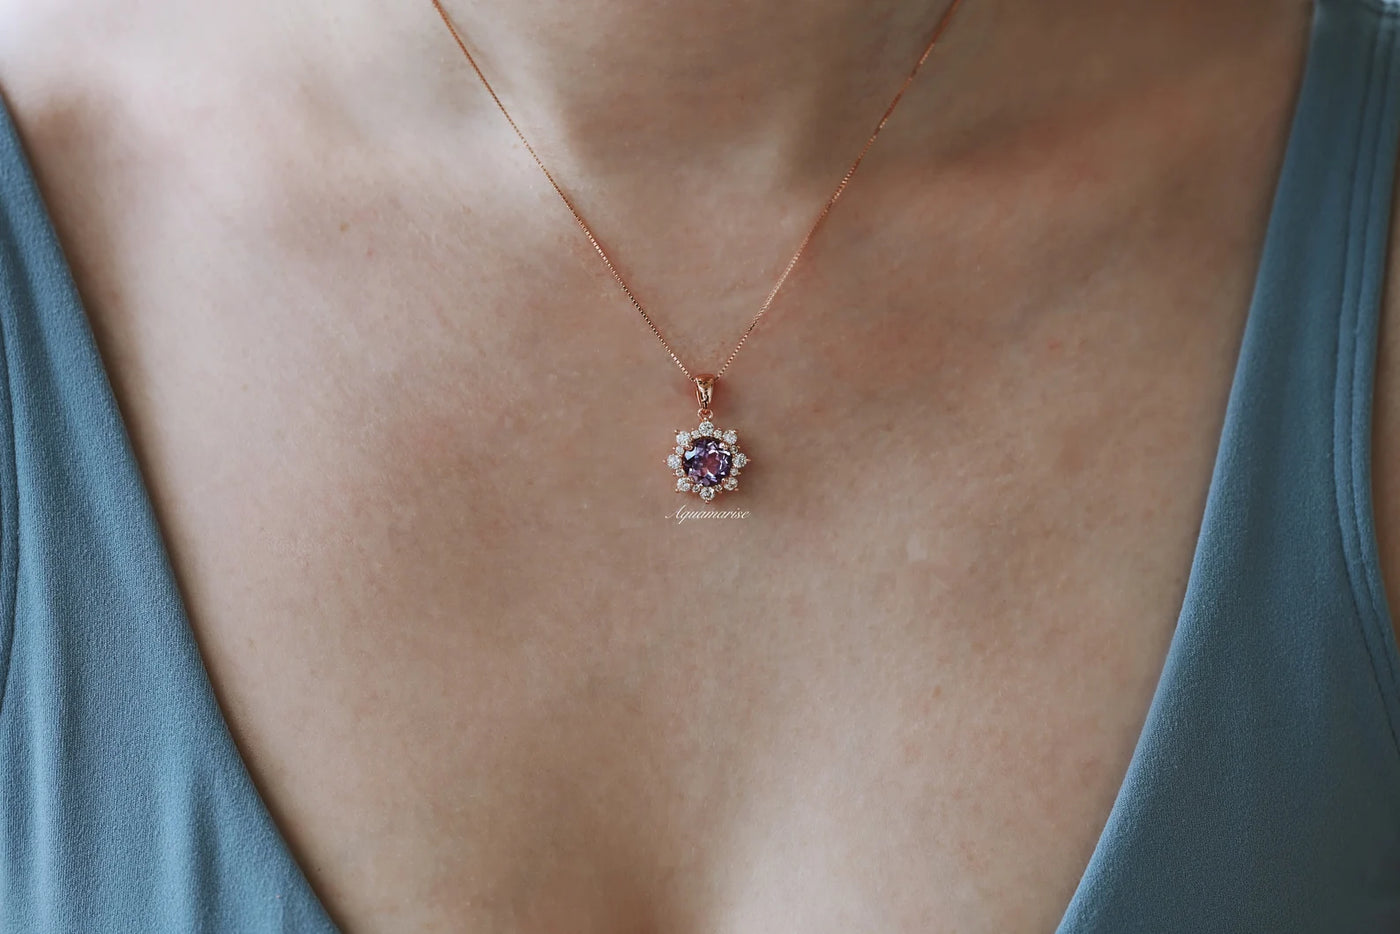 Snowflake Alexandrite Necklace- 14K Rose Gold Vermeil or Sterling Silver